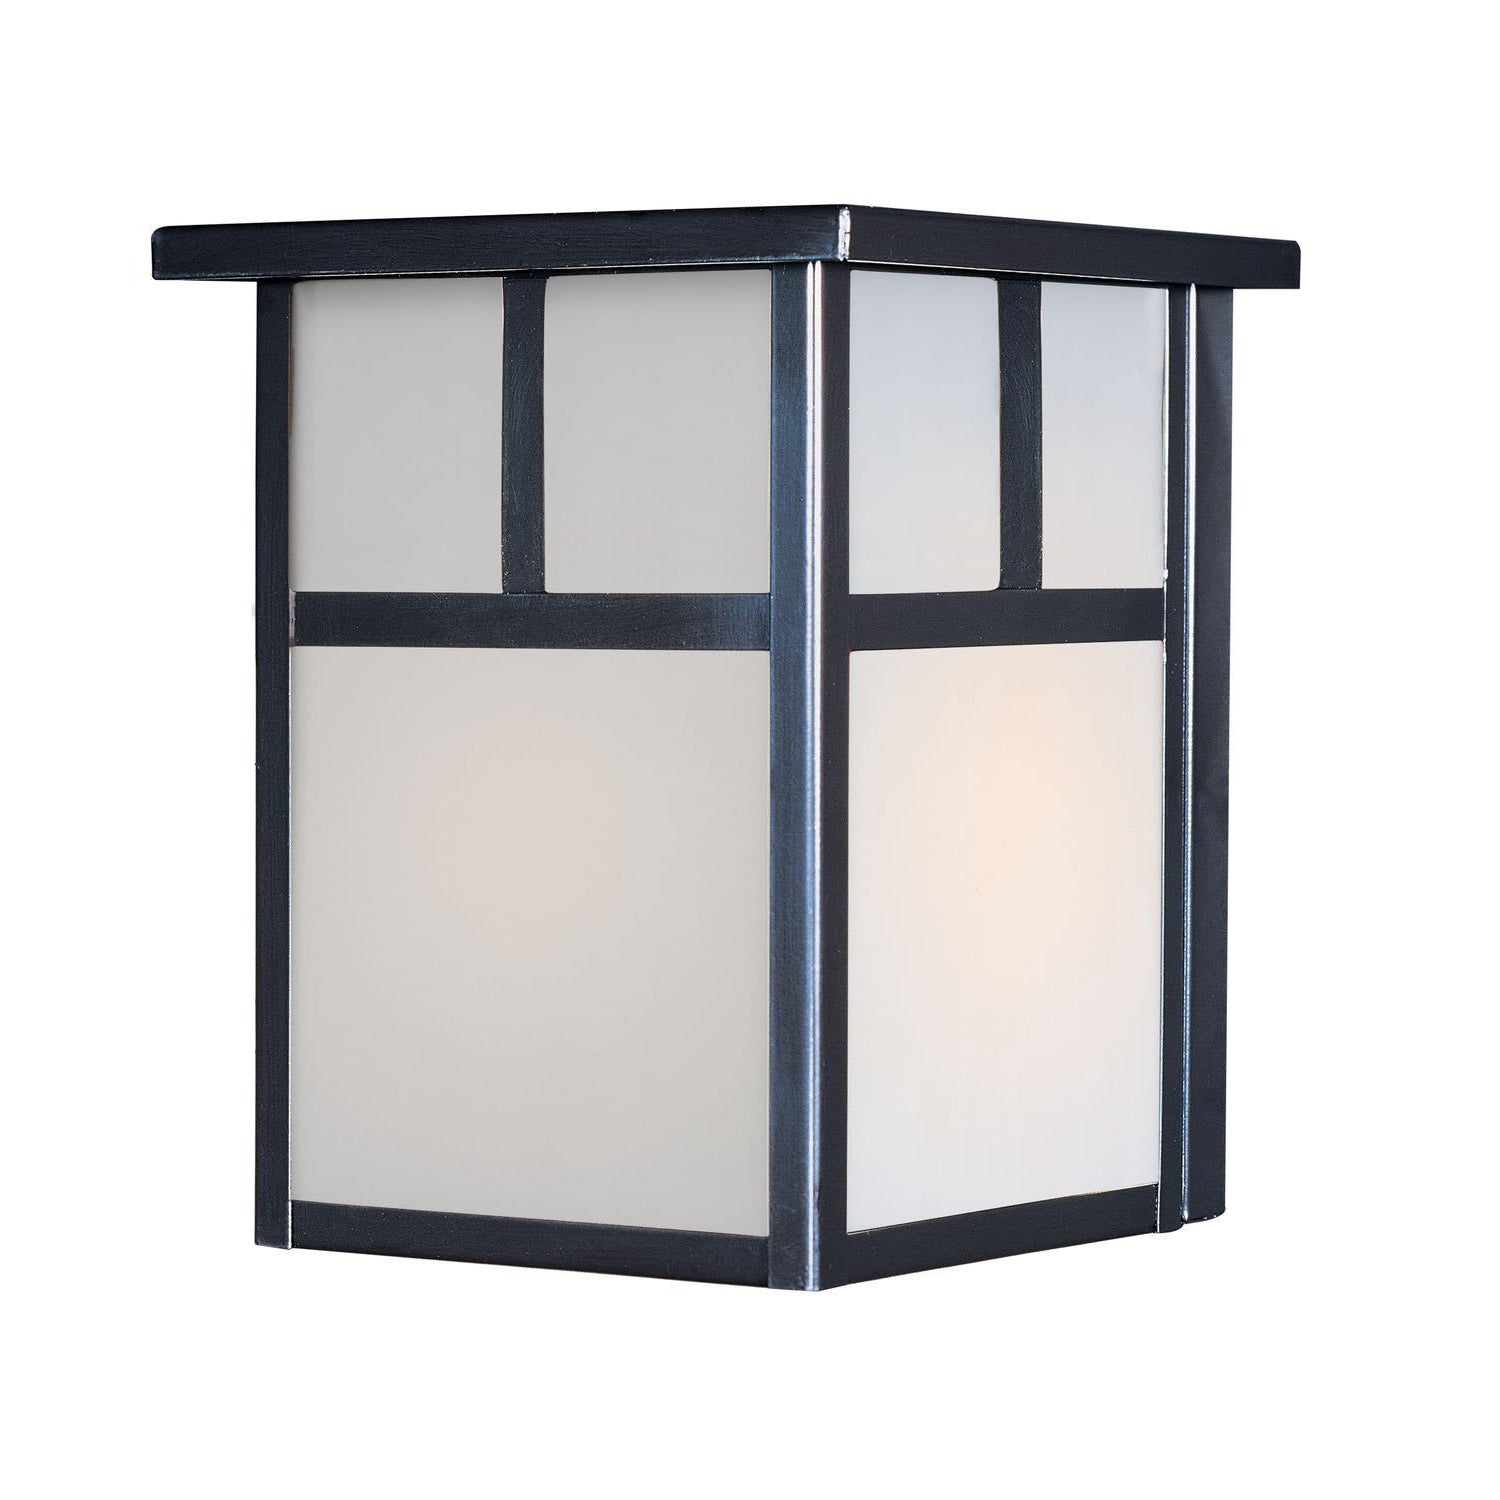 Coldwater Outdoor Wall Light Black